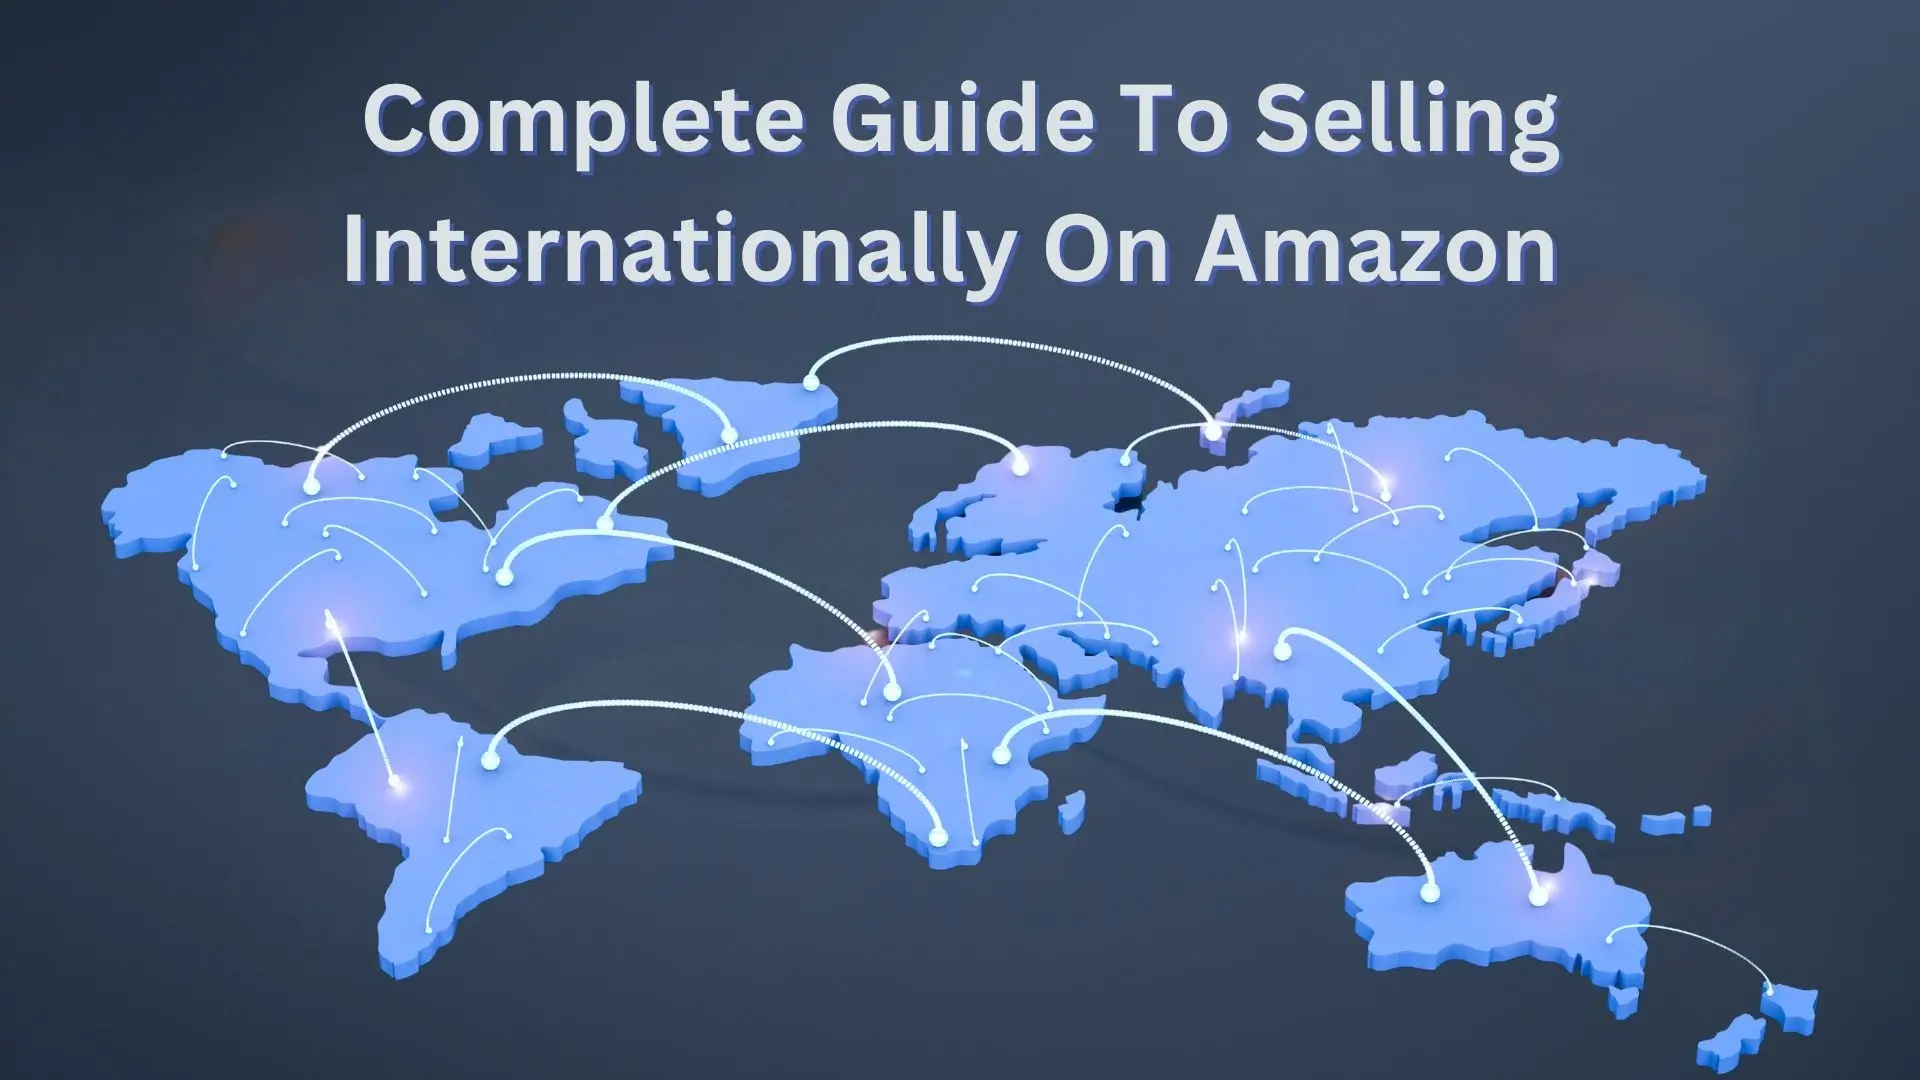 A graphic showing the world map with shipping lines between continents and has text saying "Complete guide to selling internationally on Amazon".